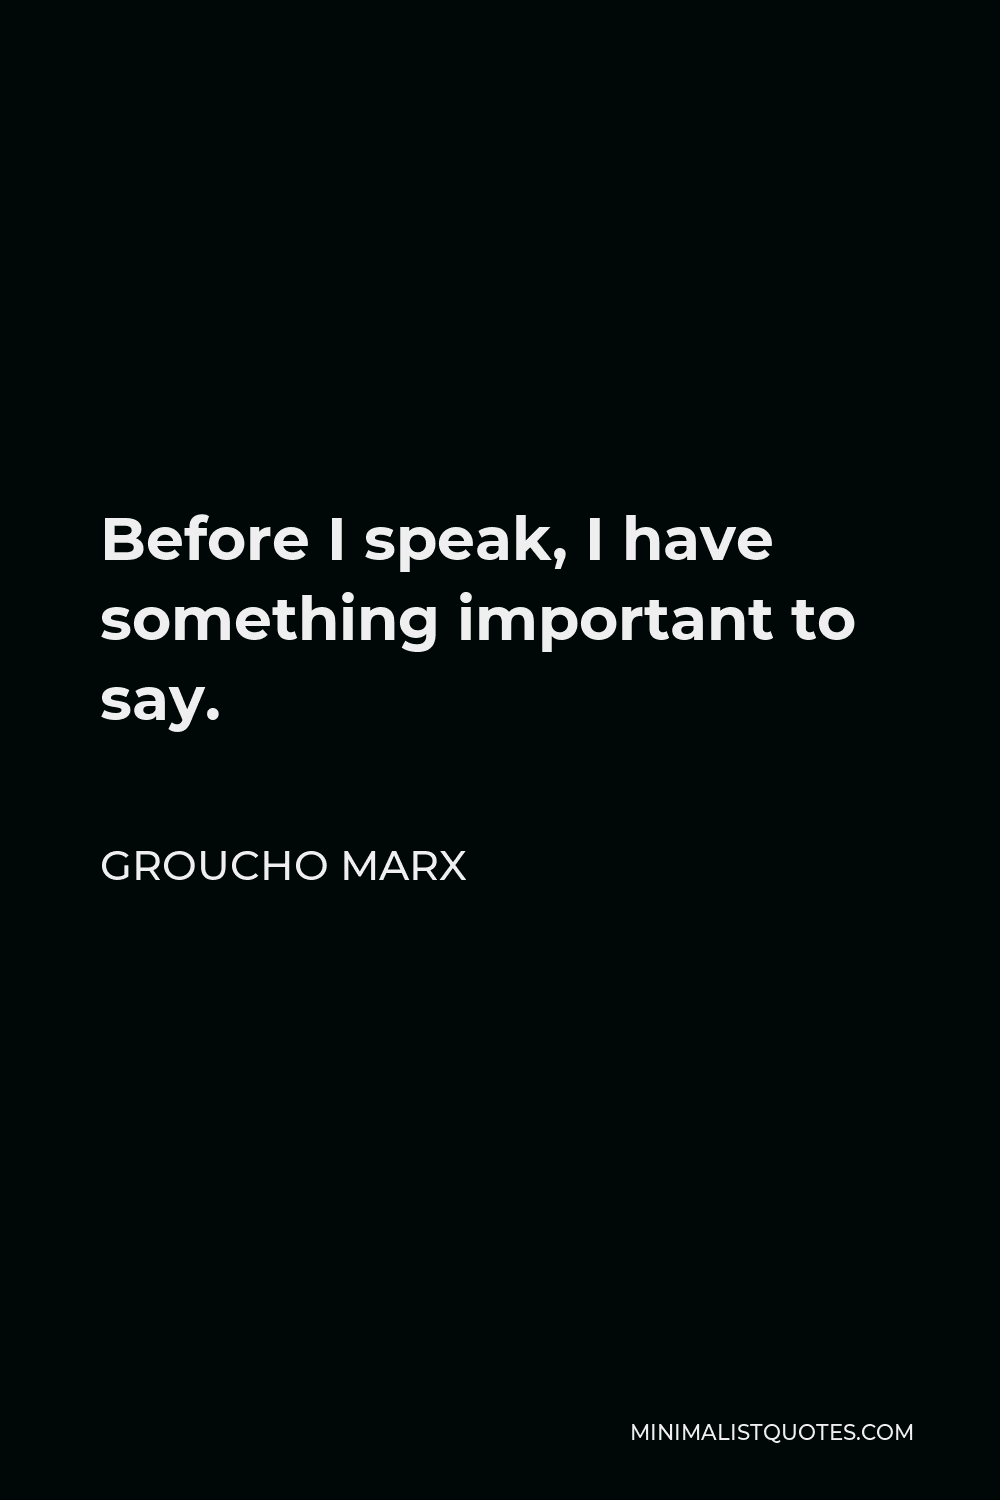 Groucho Marx Quote - Before I speak, I have something important to say.